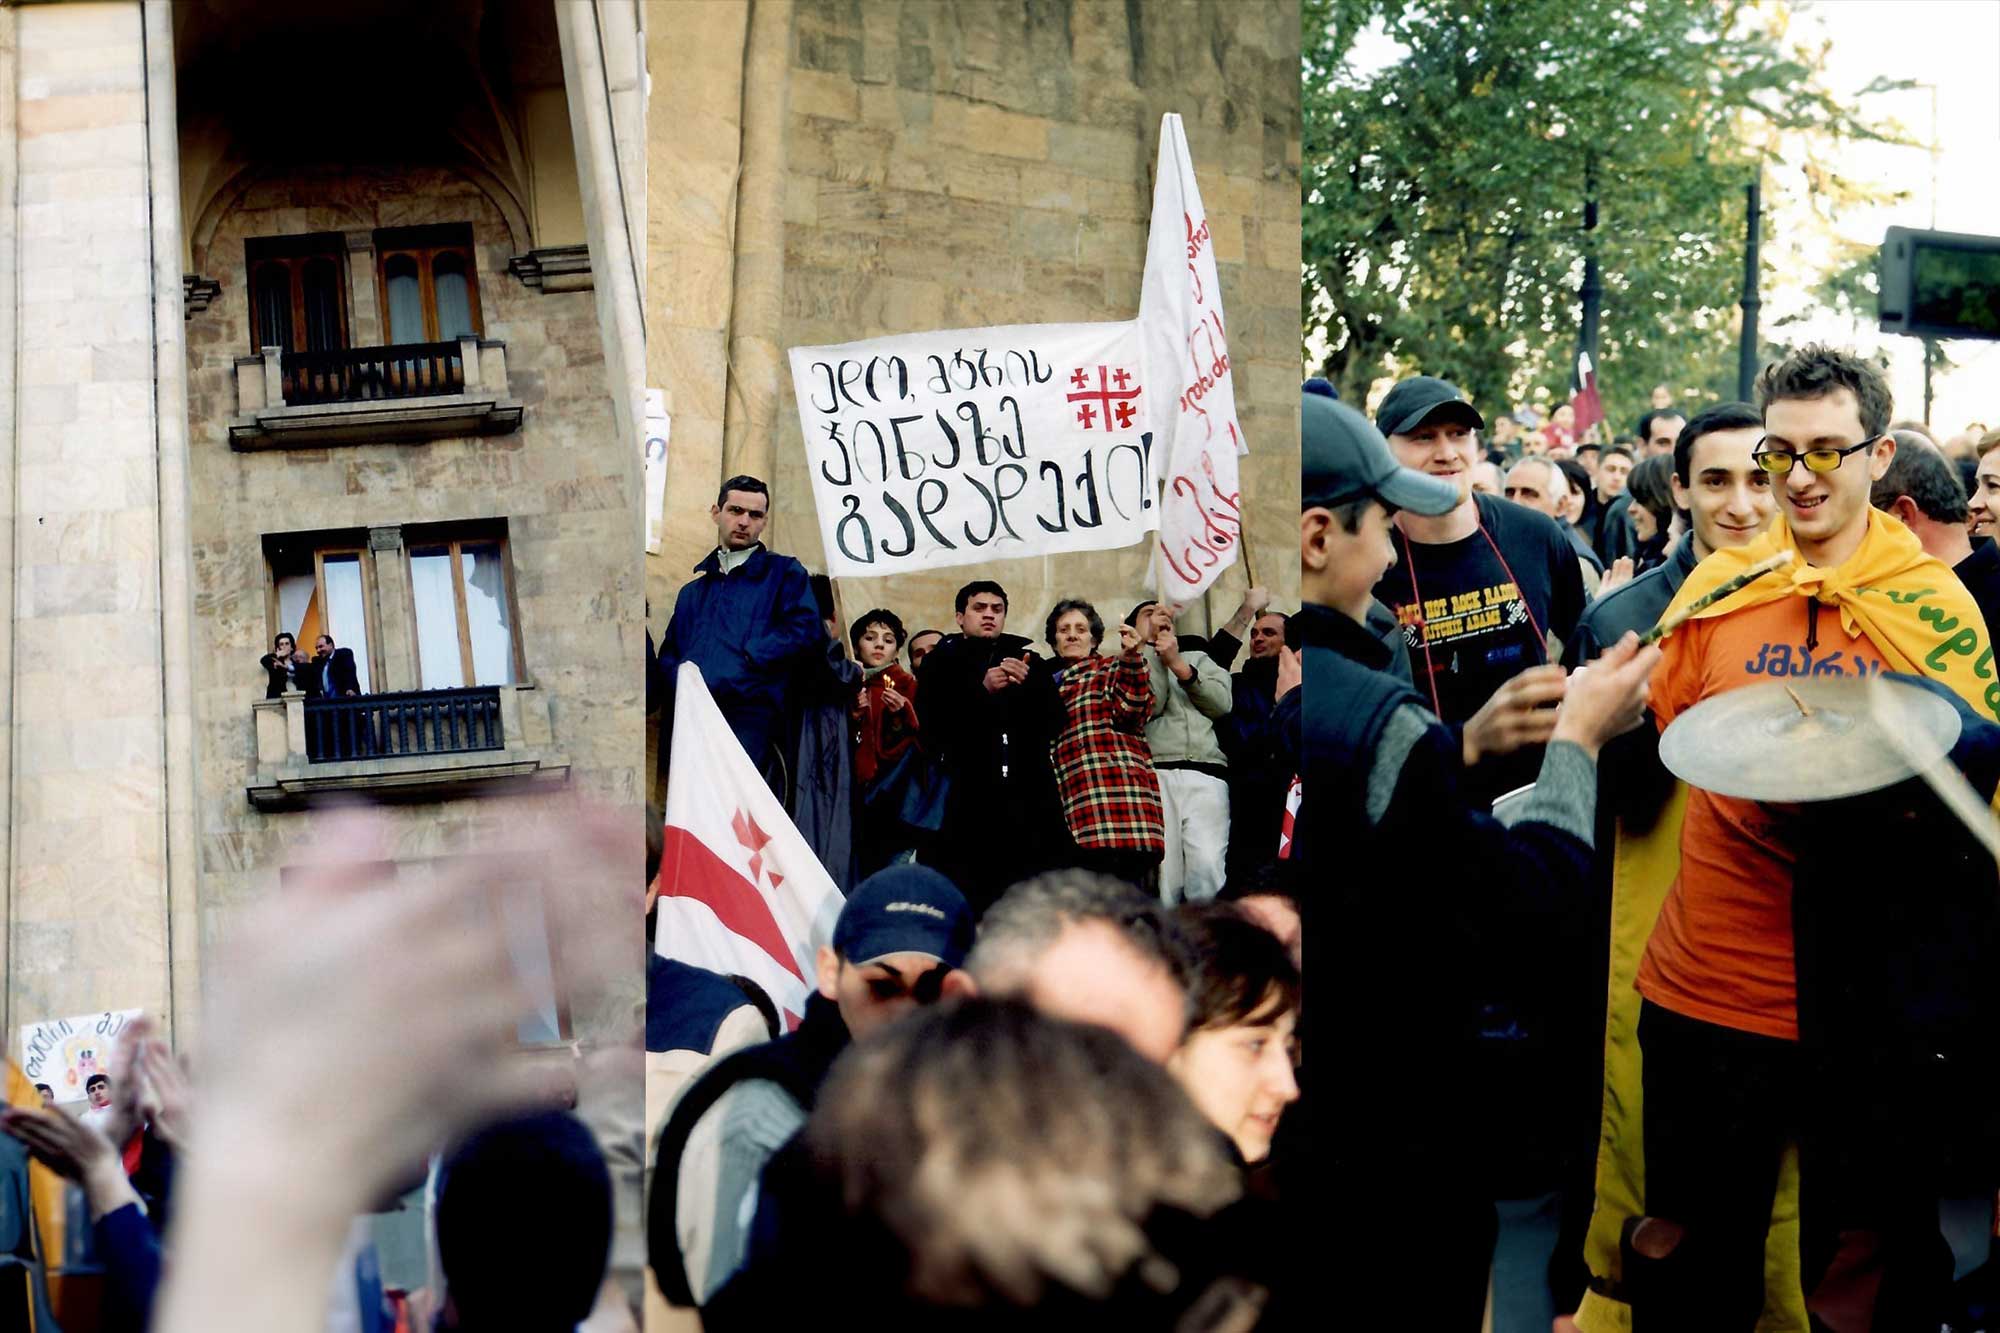 [left] Nino Burjanadze and Zurab Jvania, leaders of the political alliance Burjanadze-Democrats, addressing protesters in front of the Georgian Parliament in November 2003. On November 7th, the alliance boycotted the results of the parliamentary elections held on November 2, triggering mass protests that ultimately resulted in a change of government and the resignation of President Eduard Shevardnadze. [centre] Protesters holding a sign that reads, "Edo (referring colloquially to the then-President of Georgia, Eduard Shevardnadze), please resign in defiance of our adversaries." [right] Activist of Kamara Movement (Kmara translates as Enough from Georgian) cheering up protesters. The resistance movement played a key role in mobilizing youth to protest against the ruling political party Union of Citizens of Georgia and the then-President of Georgia, Eduard Shevardnadze, ultimately leading to a historical peaceful change of government, November 2003. © Irma Bajelidze